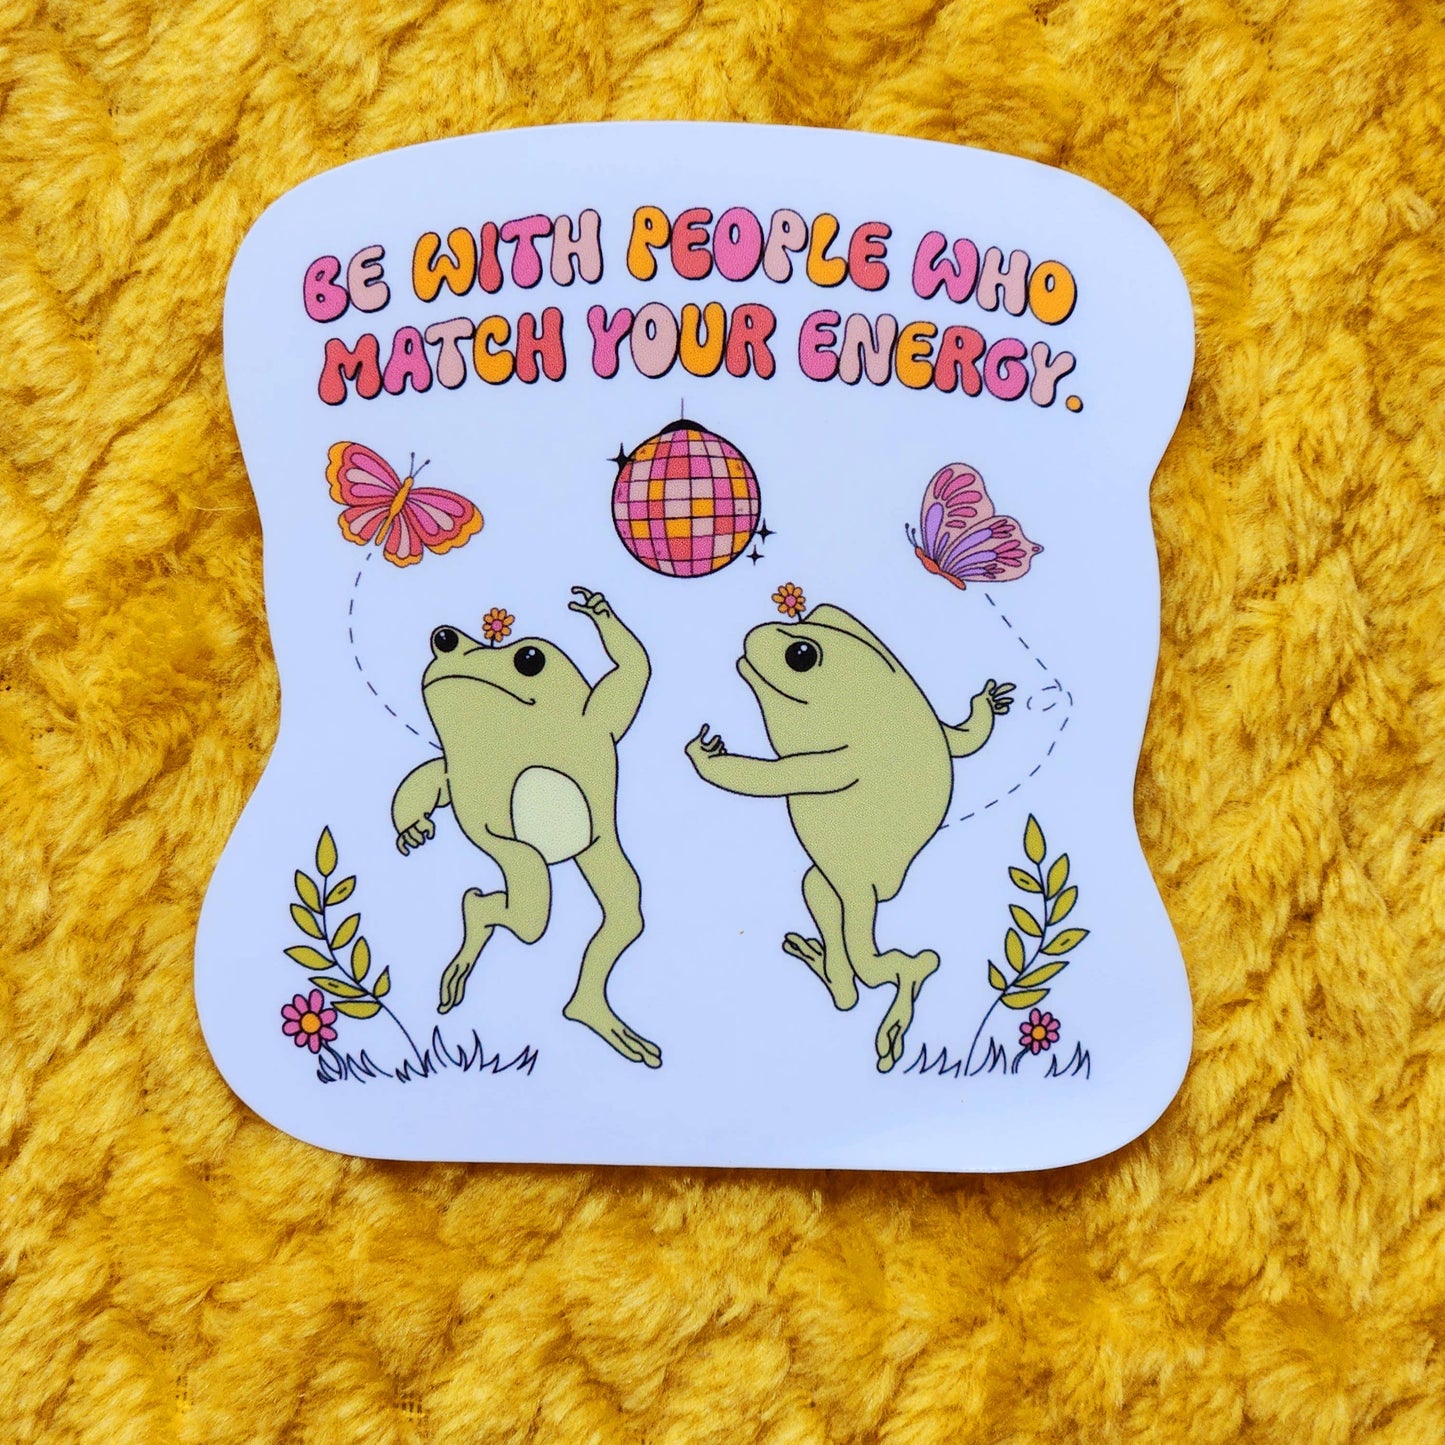 Dancing frogs sticker hydroflask planner cute retro: Holographic